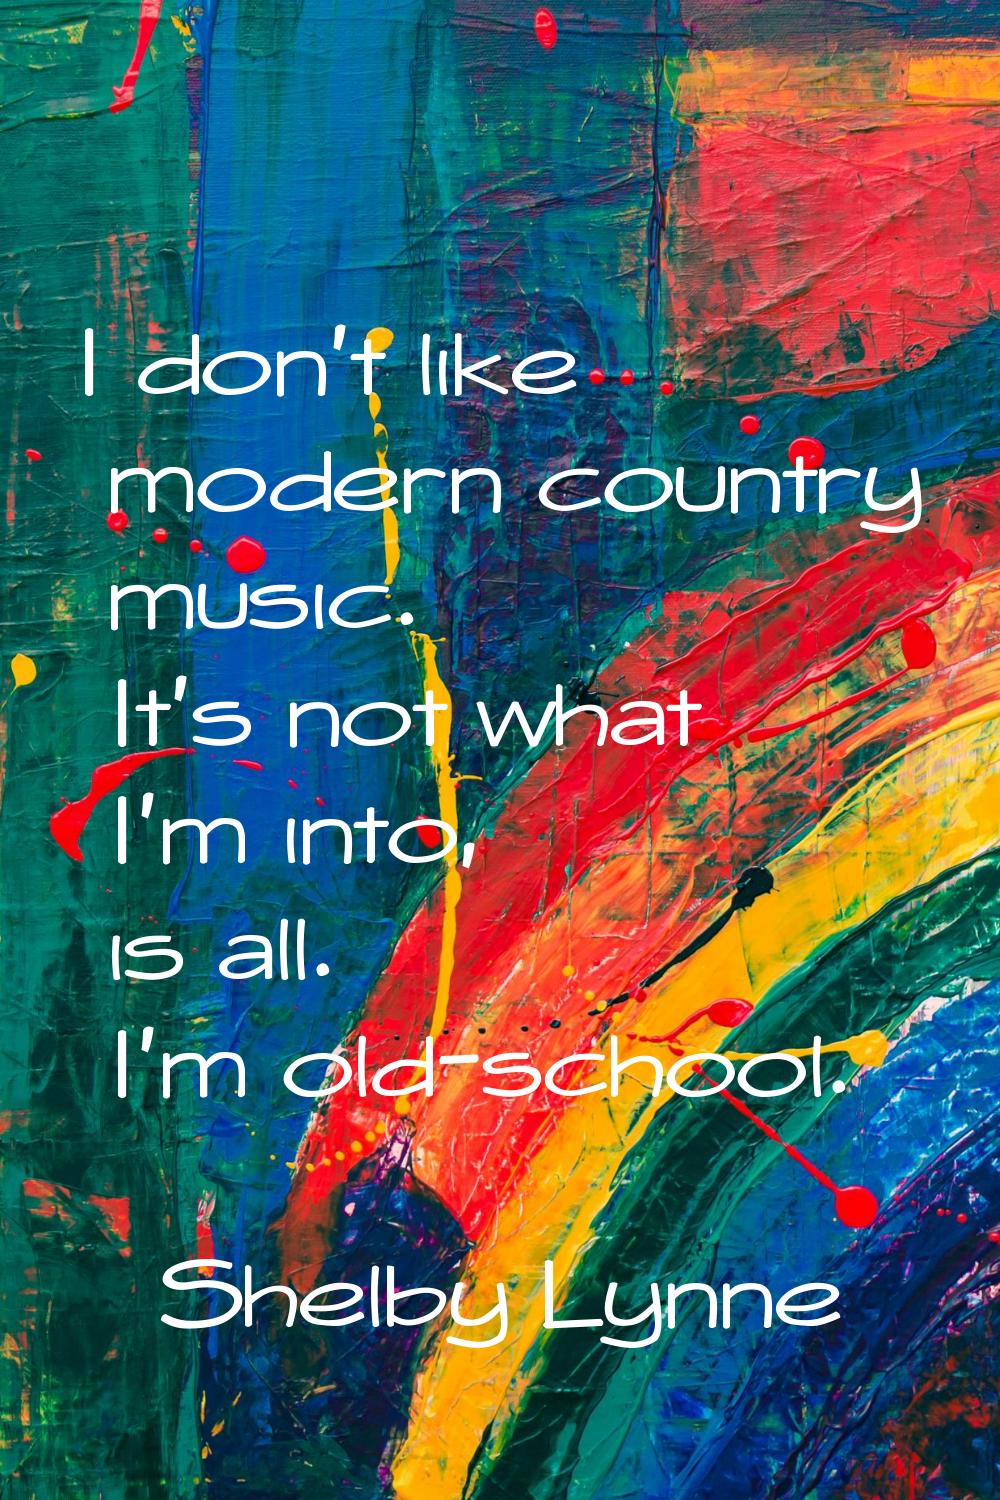 I don't like modern country music. It's not what I'm into, is all. I'm old-school.